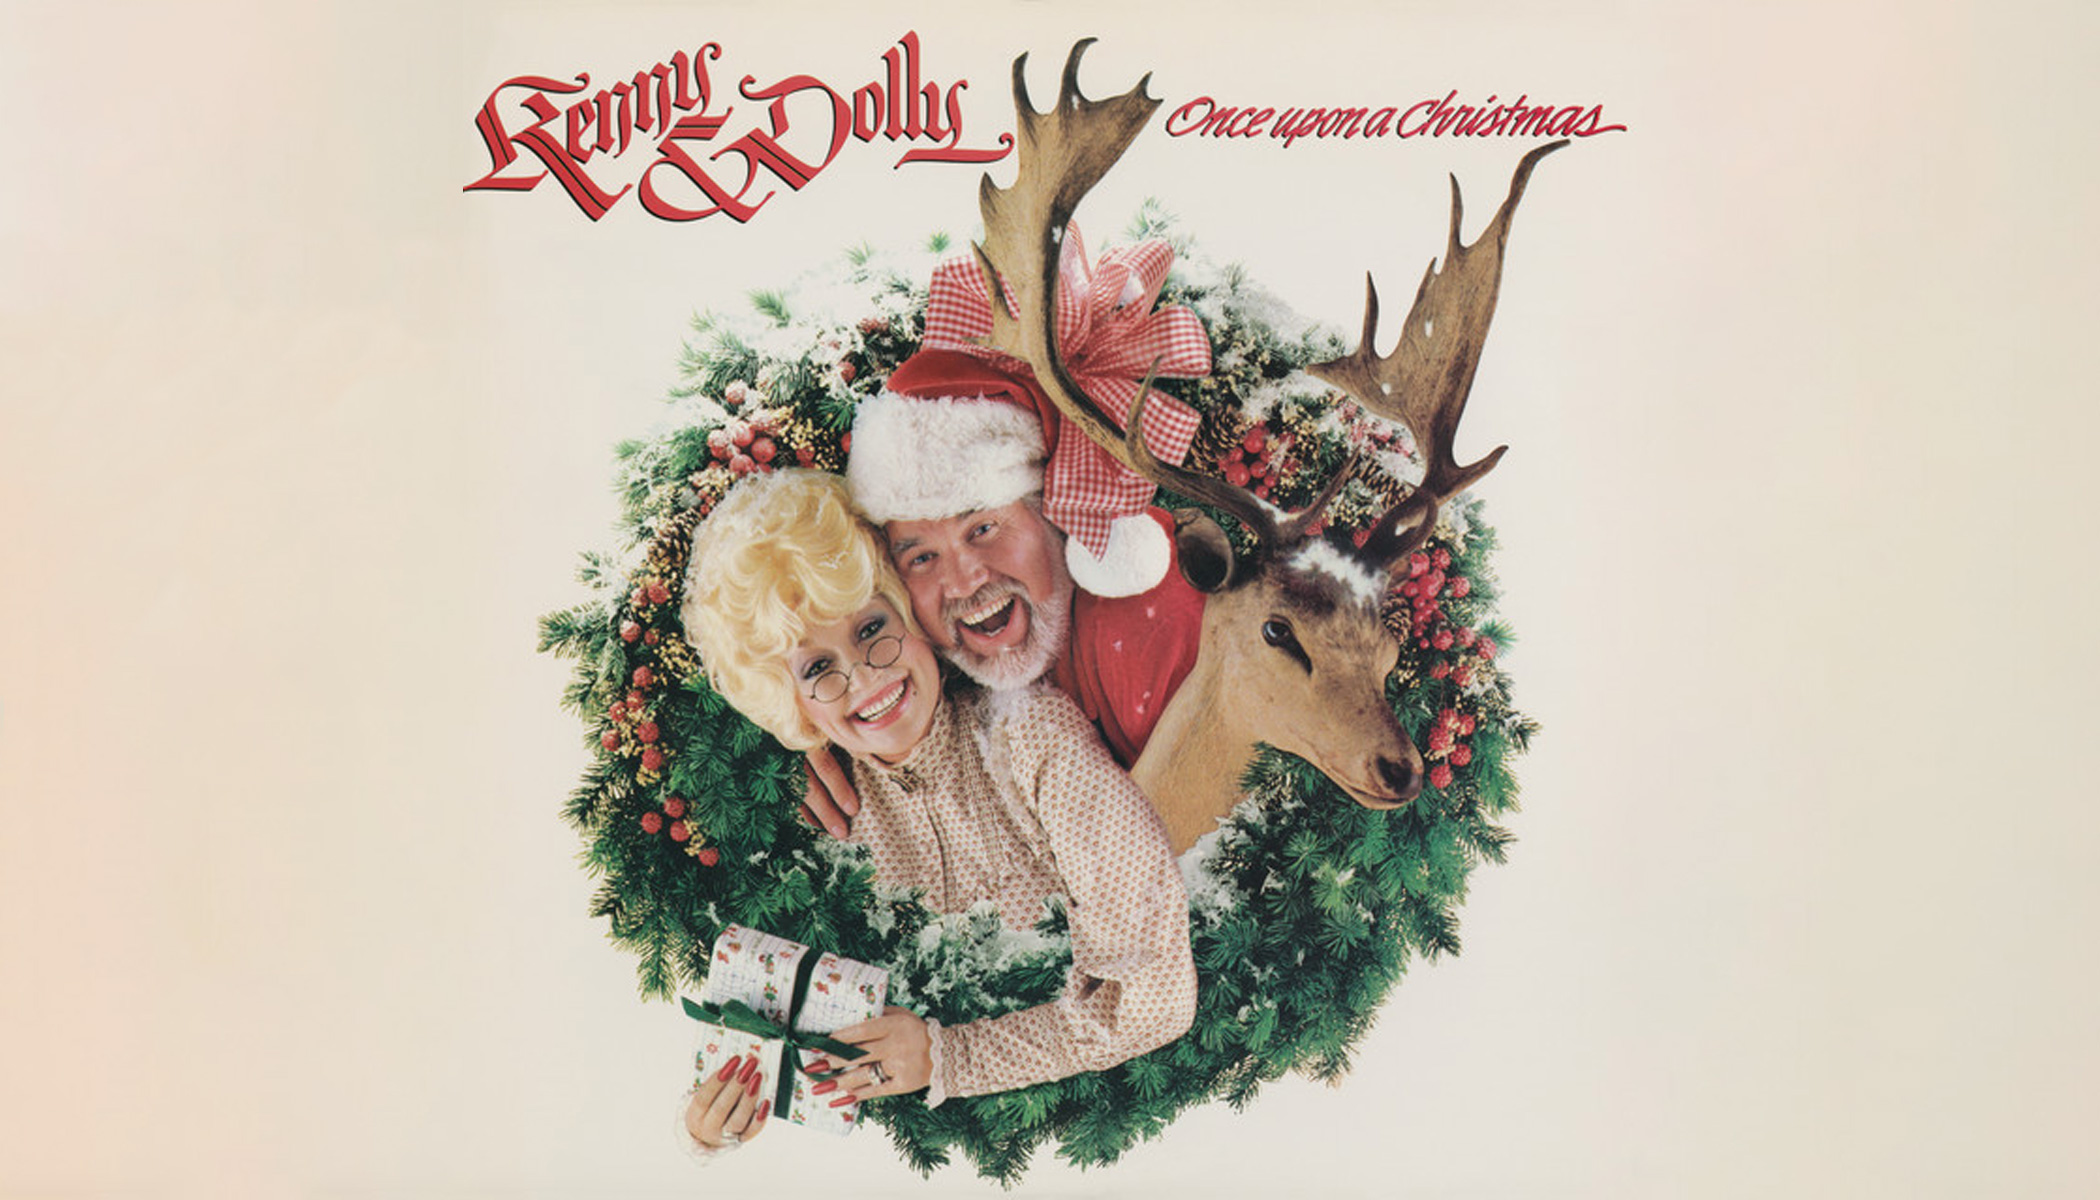 The Greatest Christmas Album of All Time